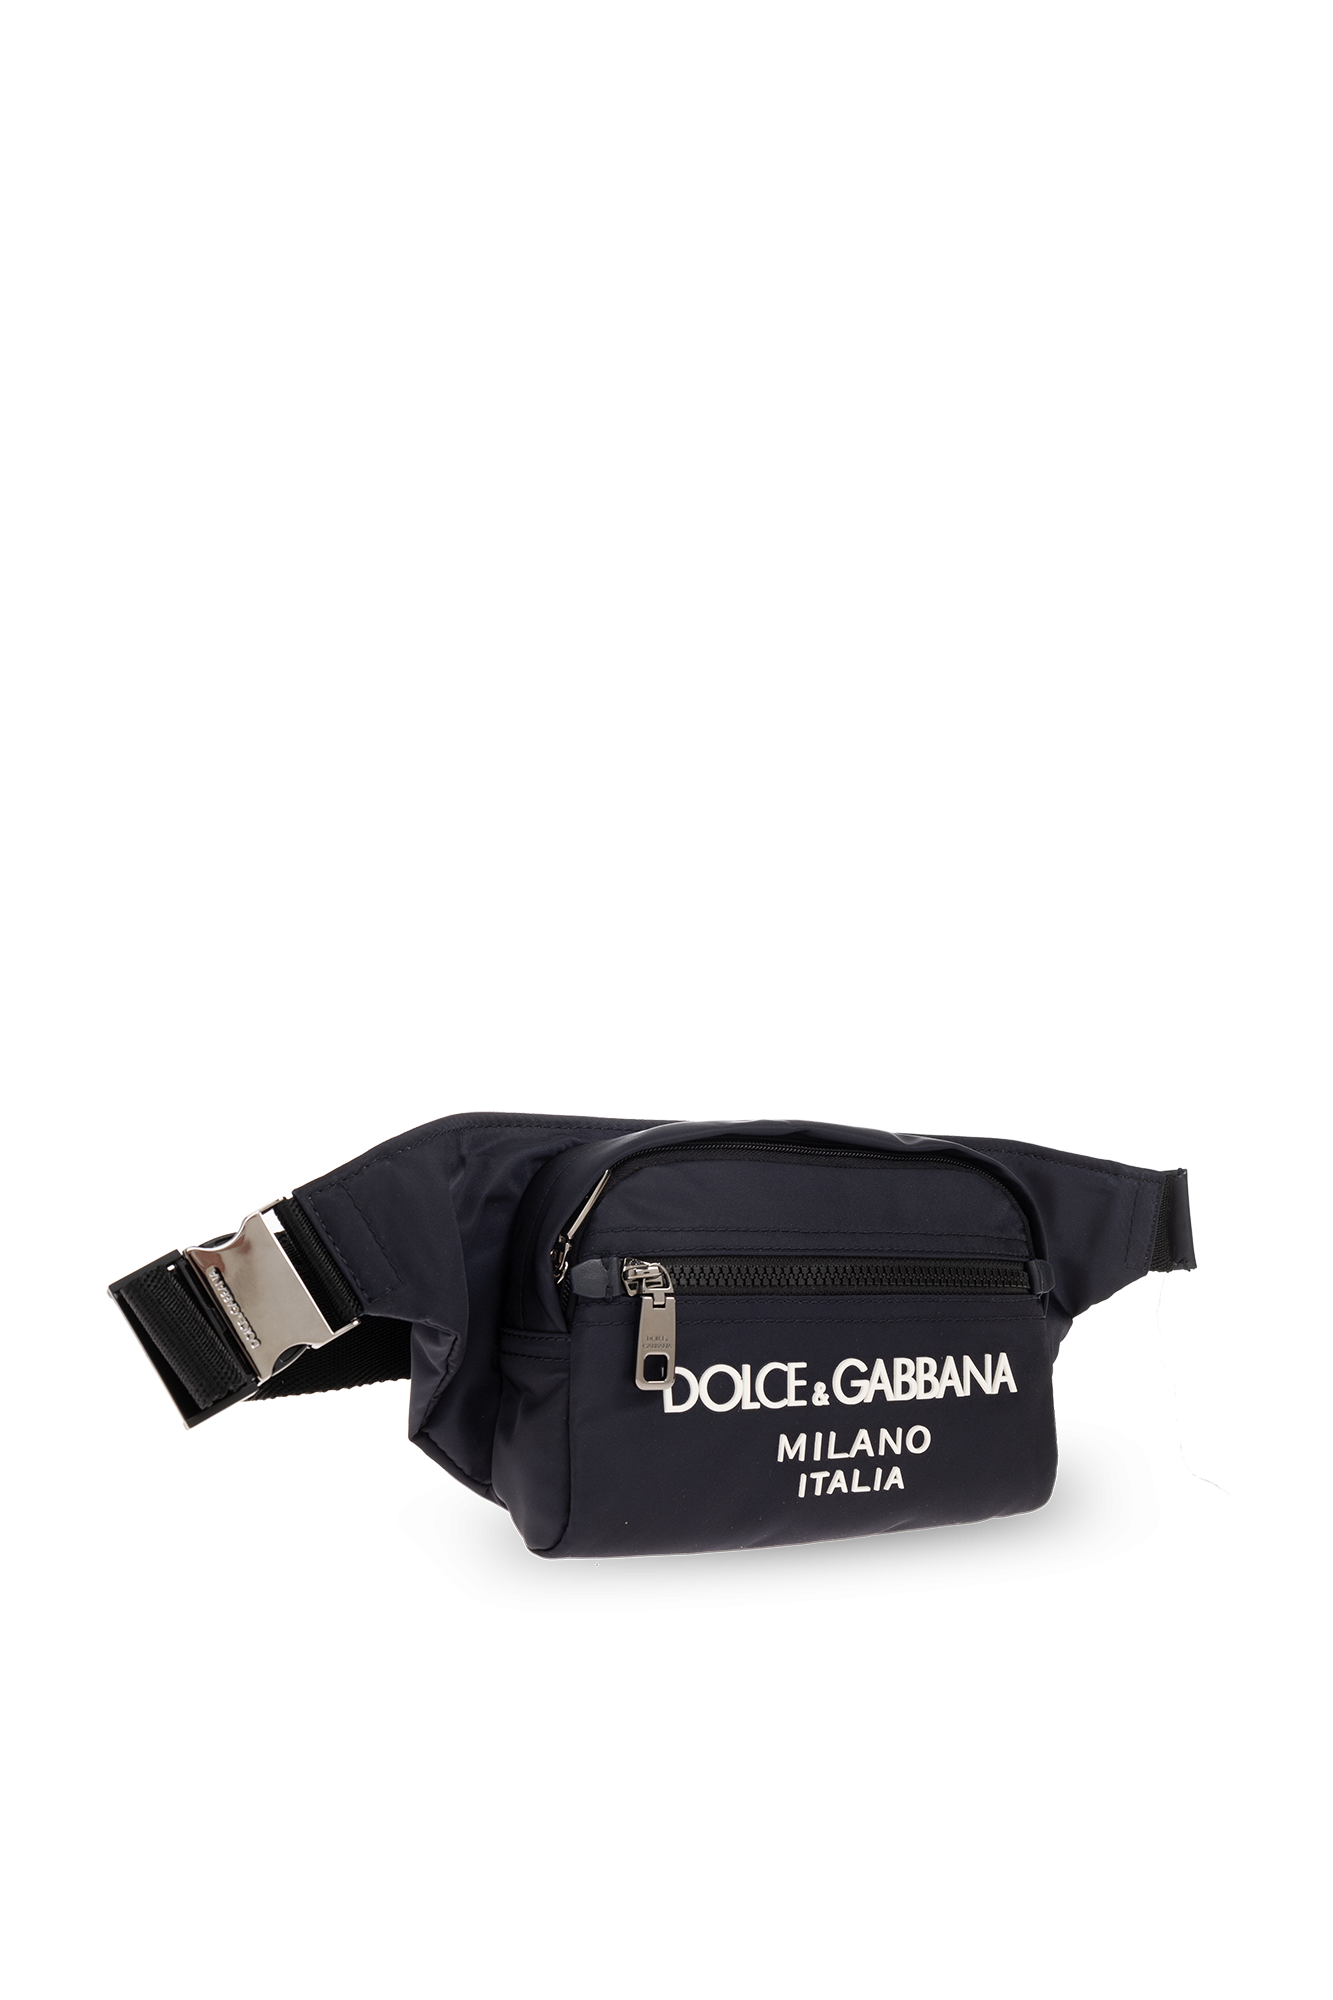 Dolce & Gabbana Pre-Owned bag with logo